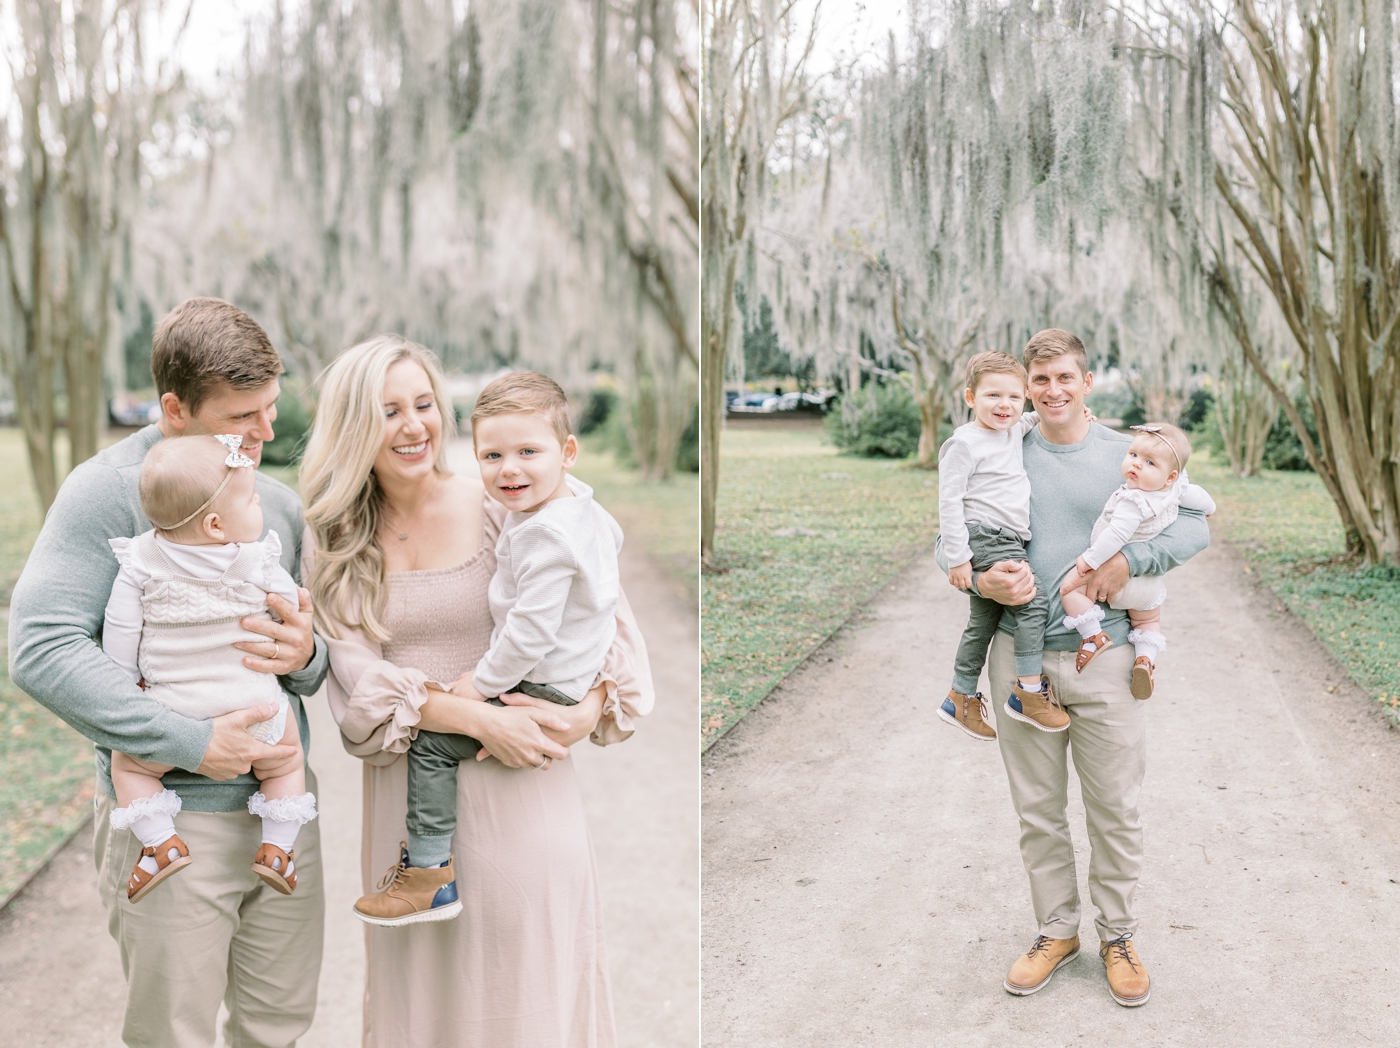 Sweet family wearing blush, white and green tones during family session at a Charleston park. Photos by Caitlyn Motycka Photography.